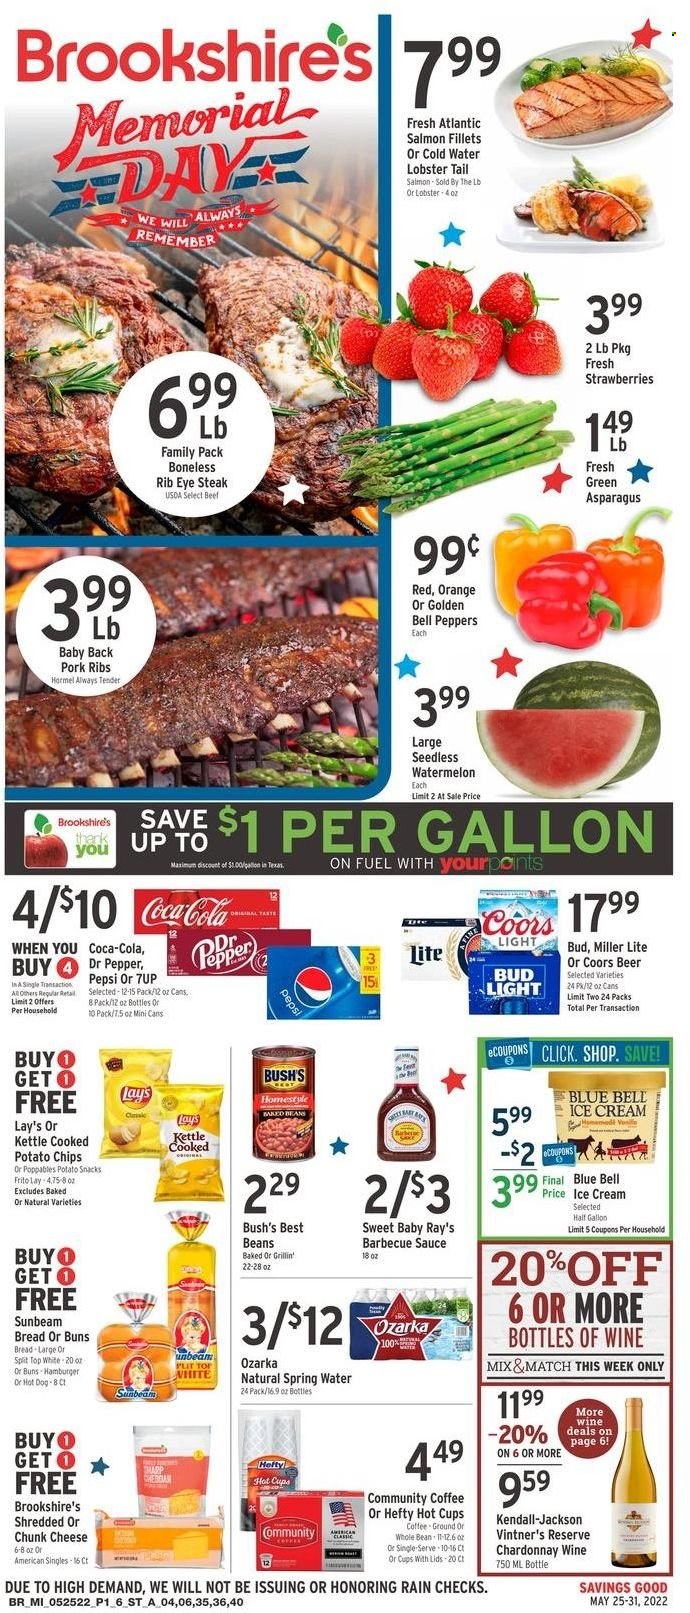 thumbnail - Brookshires Flyer - 05/25/2022 - 05/31/2022 - Sales products - bread, buns, asparagus, bell peppers, peppers, watermelon, oranges, lobster, salmon, salmon fillet, lobster tail, hot dog, hamburger, sauce, Hormel, cheese, chunk cheese, ice cream, Blue Bell, snack, potato chips, chips, Lay’s, baked beans, BBQ sauce, Coca-Cola, Pepsi, Dr. Pepper, 7UP, spring water, coffee, white wine, Chardonnay, beer, Bud Light, beef meat, steak, ribeye steak, pork meat, pork ribs, pork back ribs, Hefty, cup, Miller Lite, Coors. Page 1.